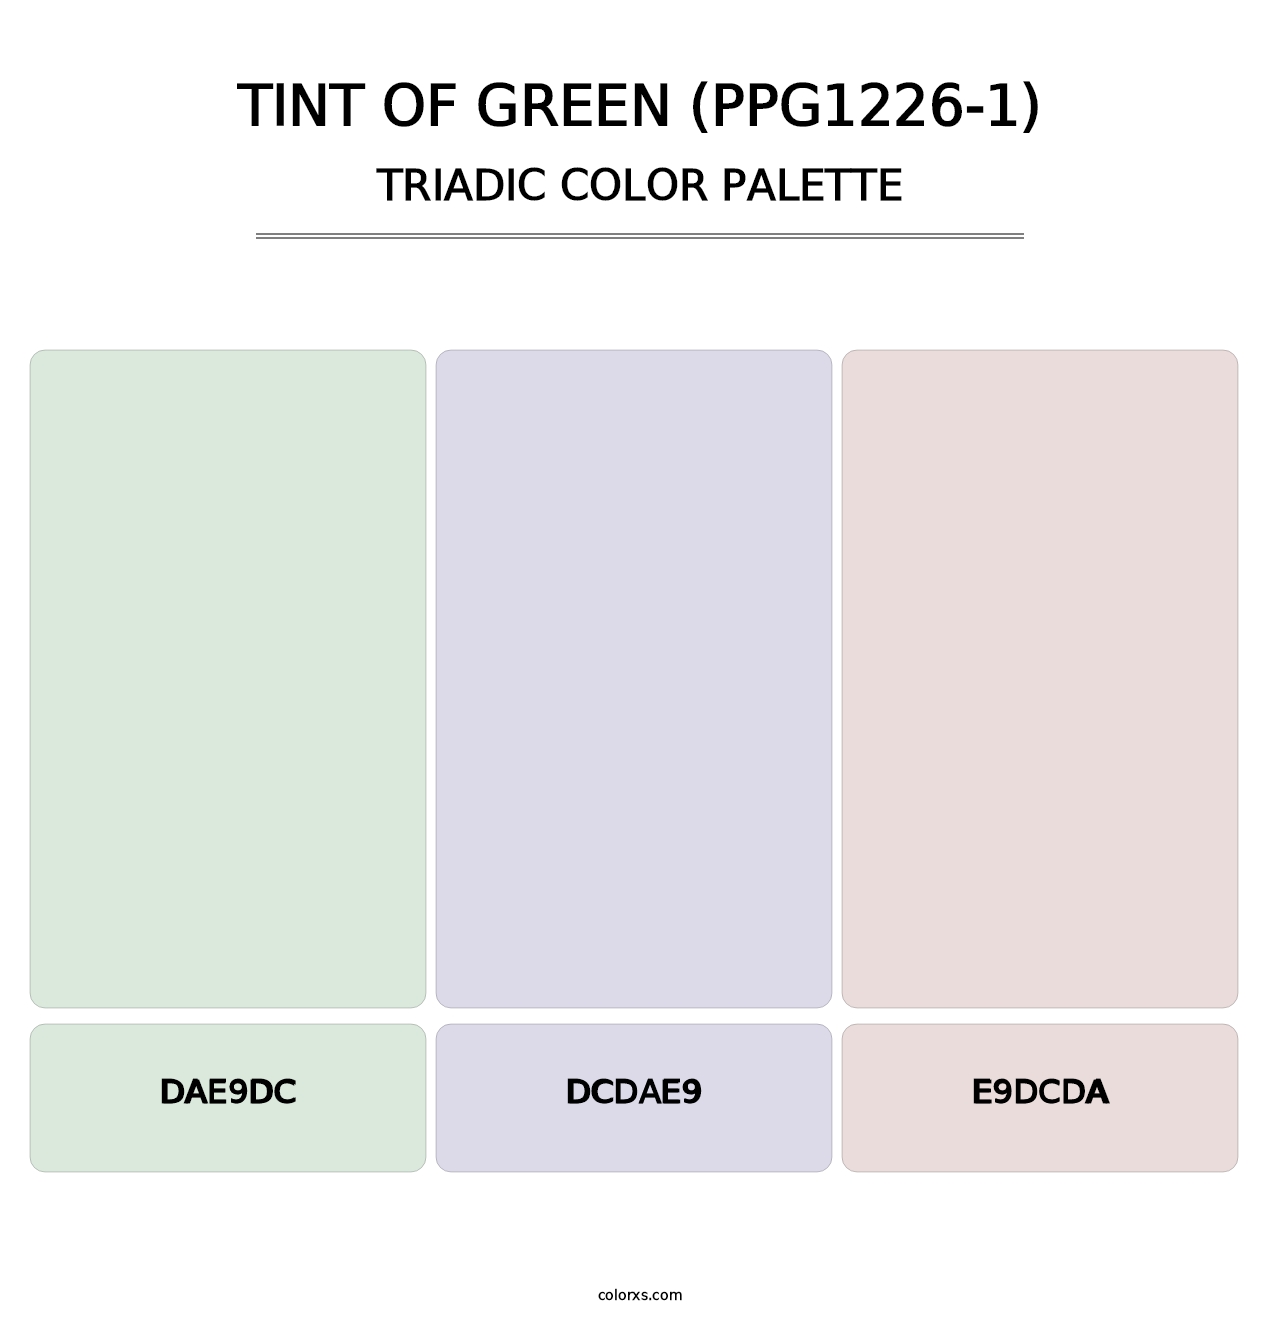 Tint Of Green (PPG1226-1) - Triadic Color Palette